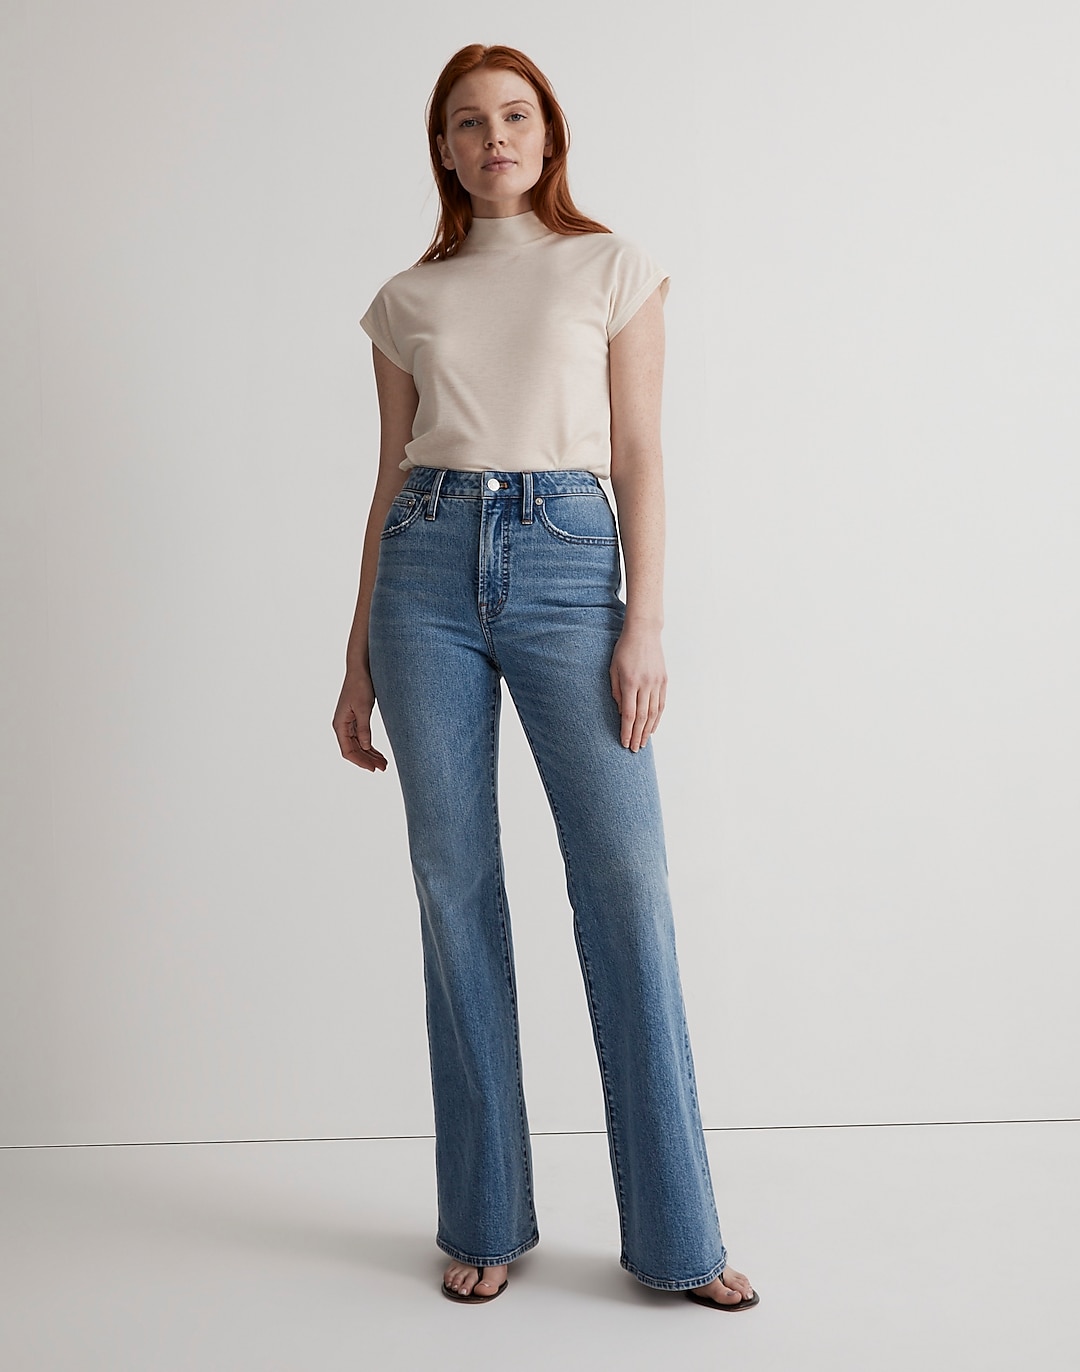 The Curvy Perfect Vintage Flare Jean in Tarlow Wash | Madewell